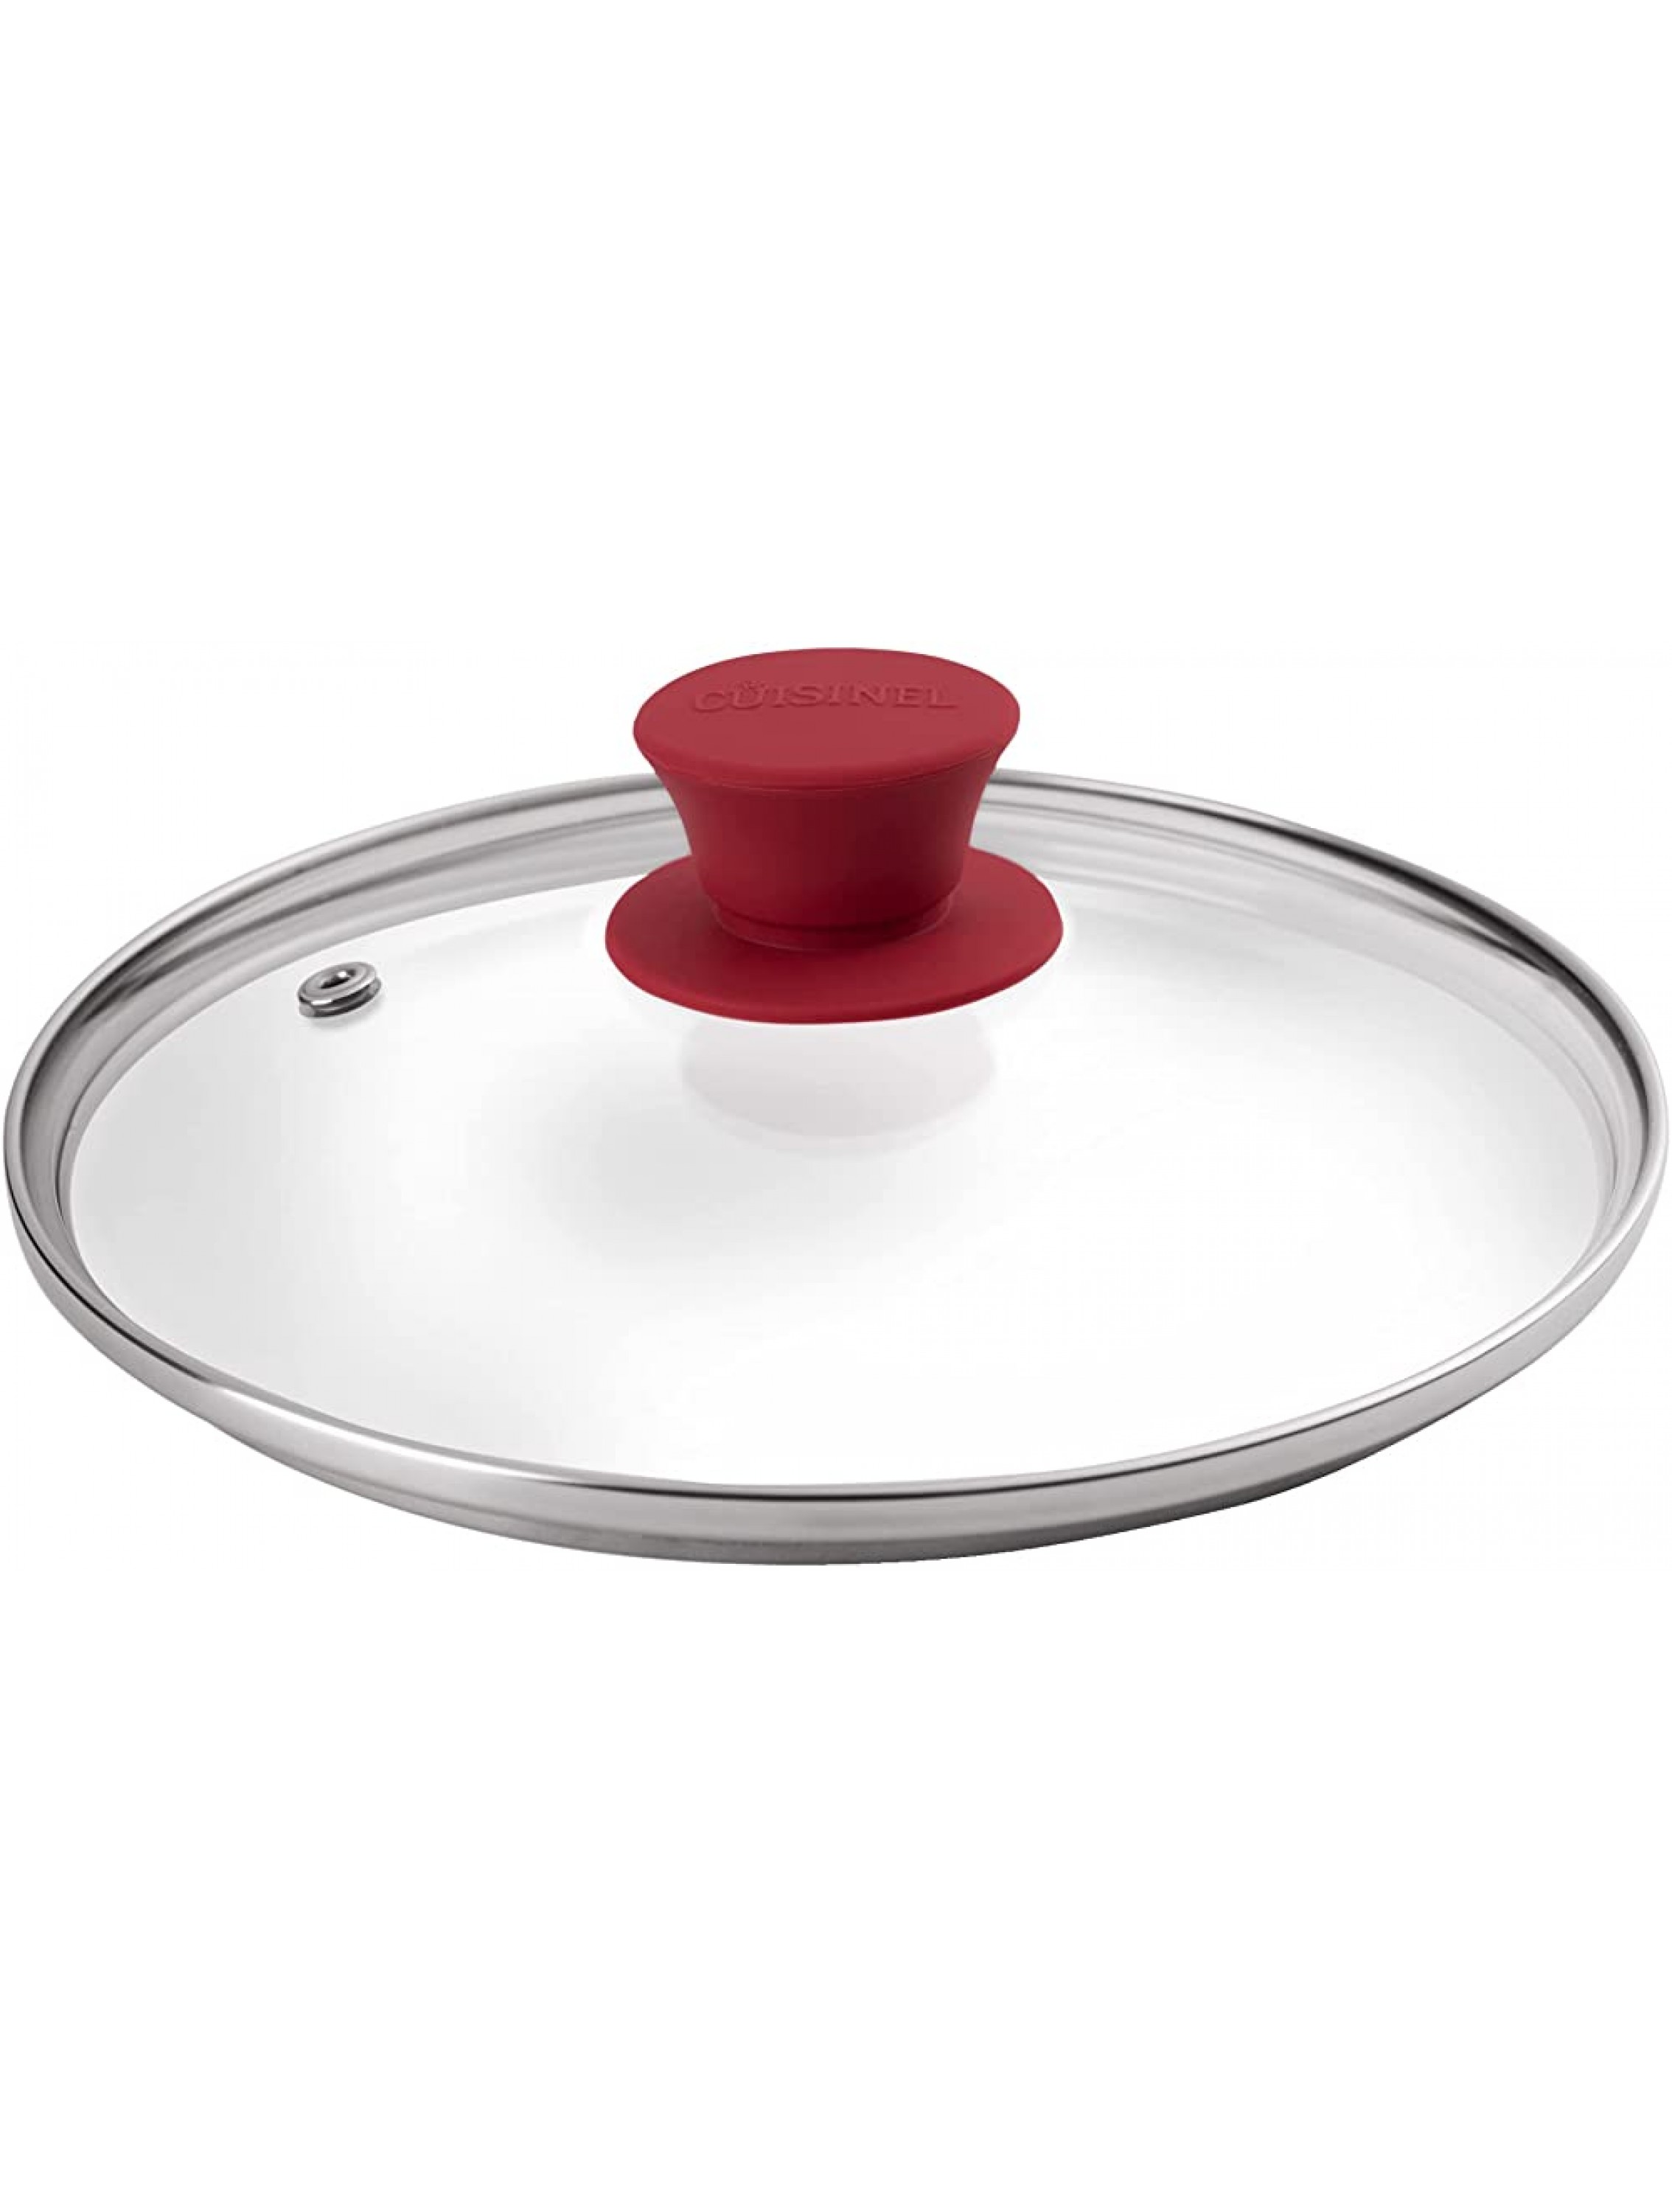 Glass Lid with Steam Vent Hole 8-Inch 20.32cm Compatible with Lodge Cast Iron Skillet Pan Fully Assembled Universal Replacement Cover Tempered and Oven Safe Reinforced Stainless Steel Rim - B4WKPPCJM